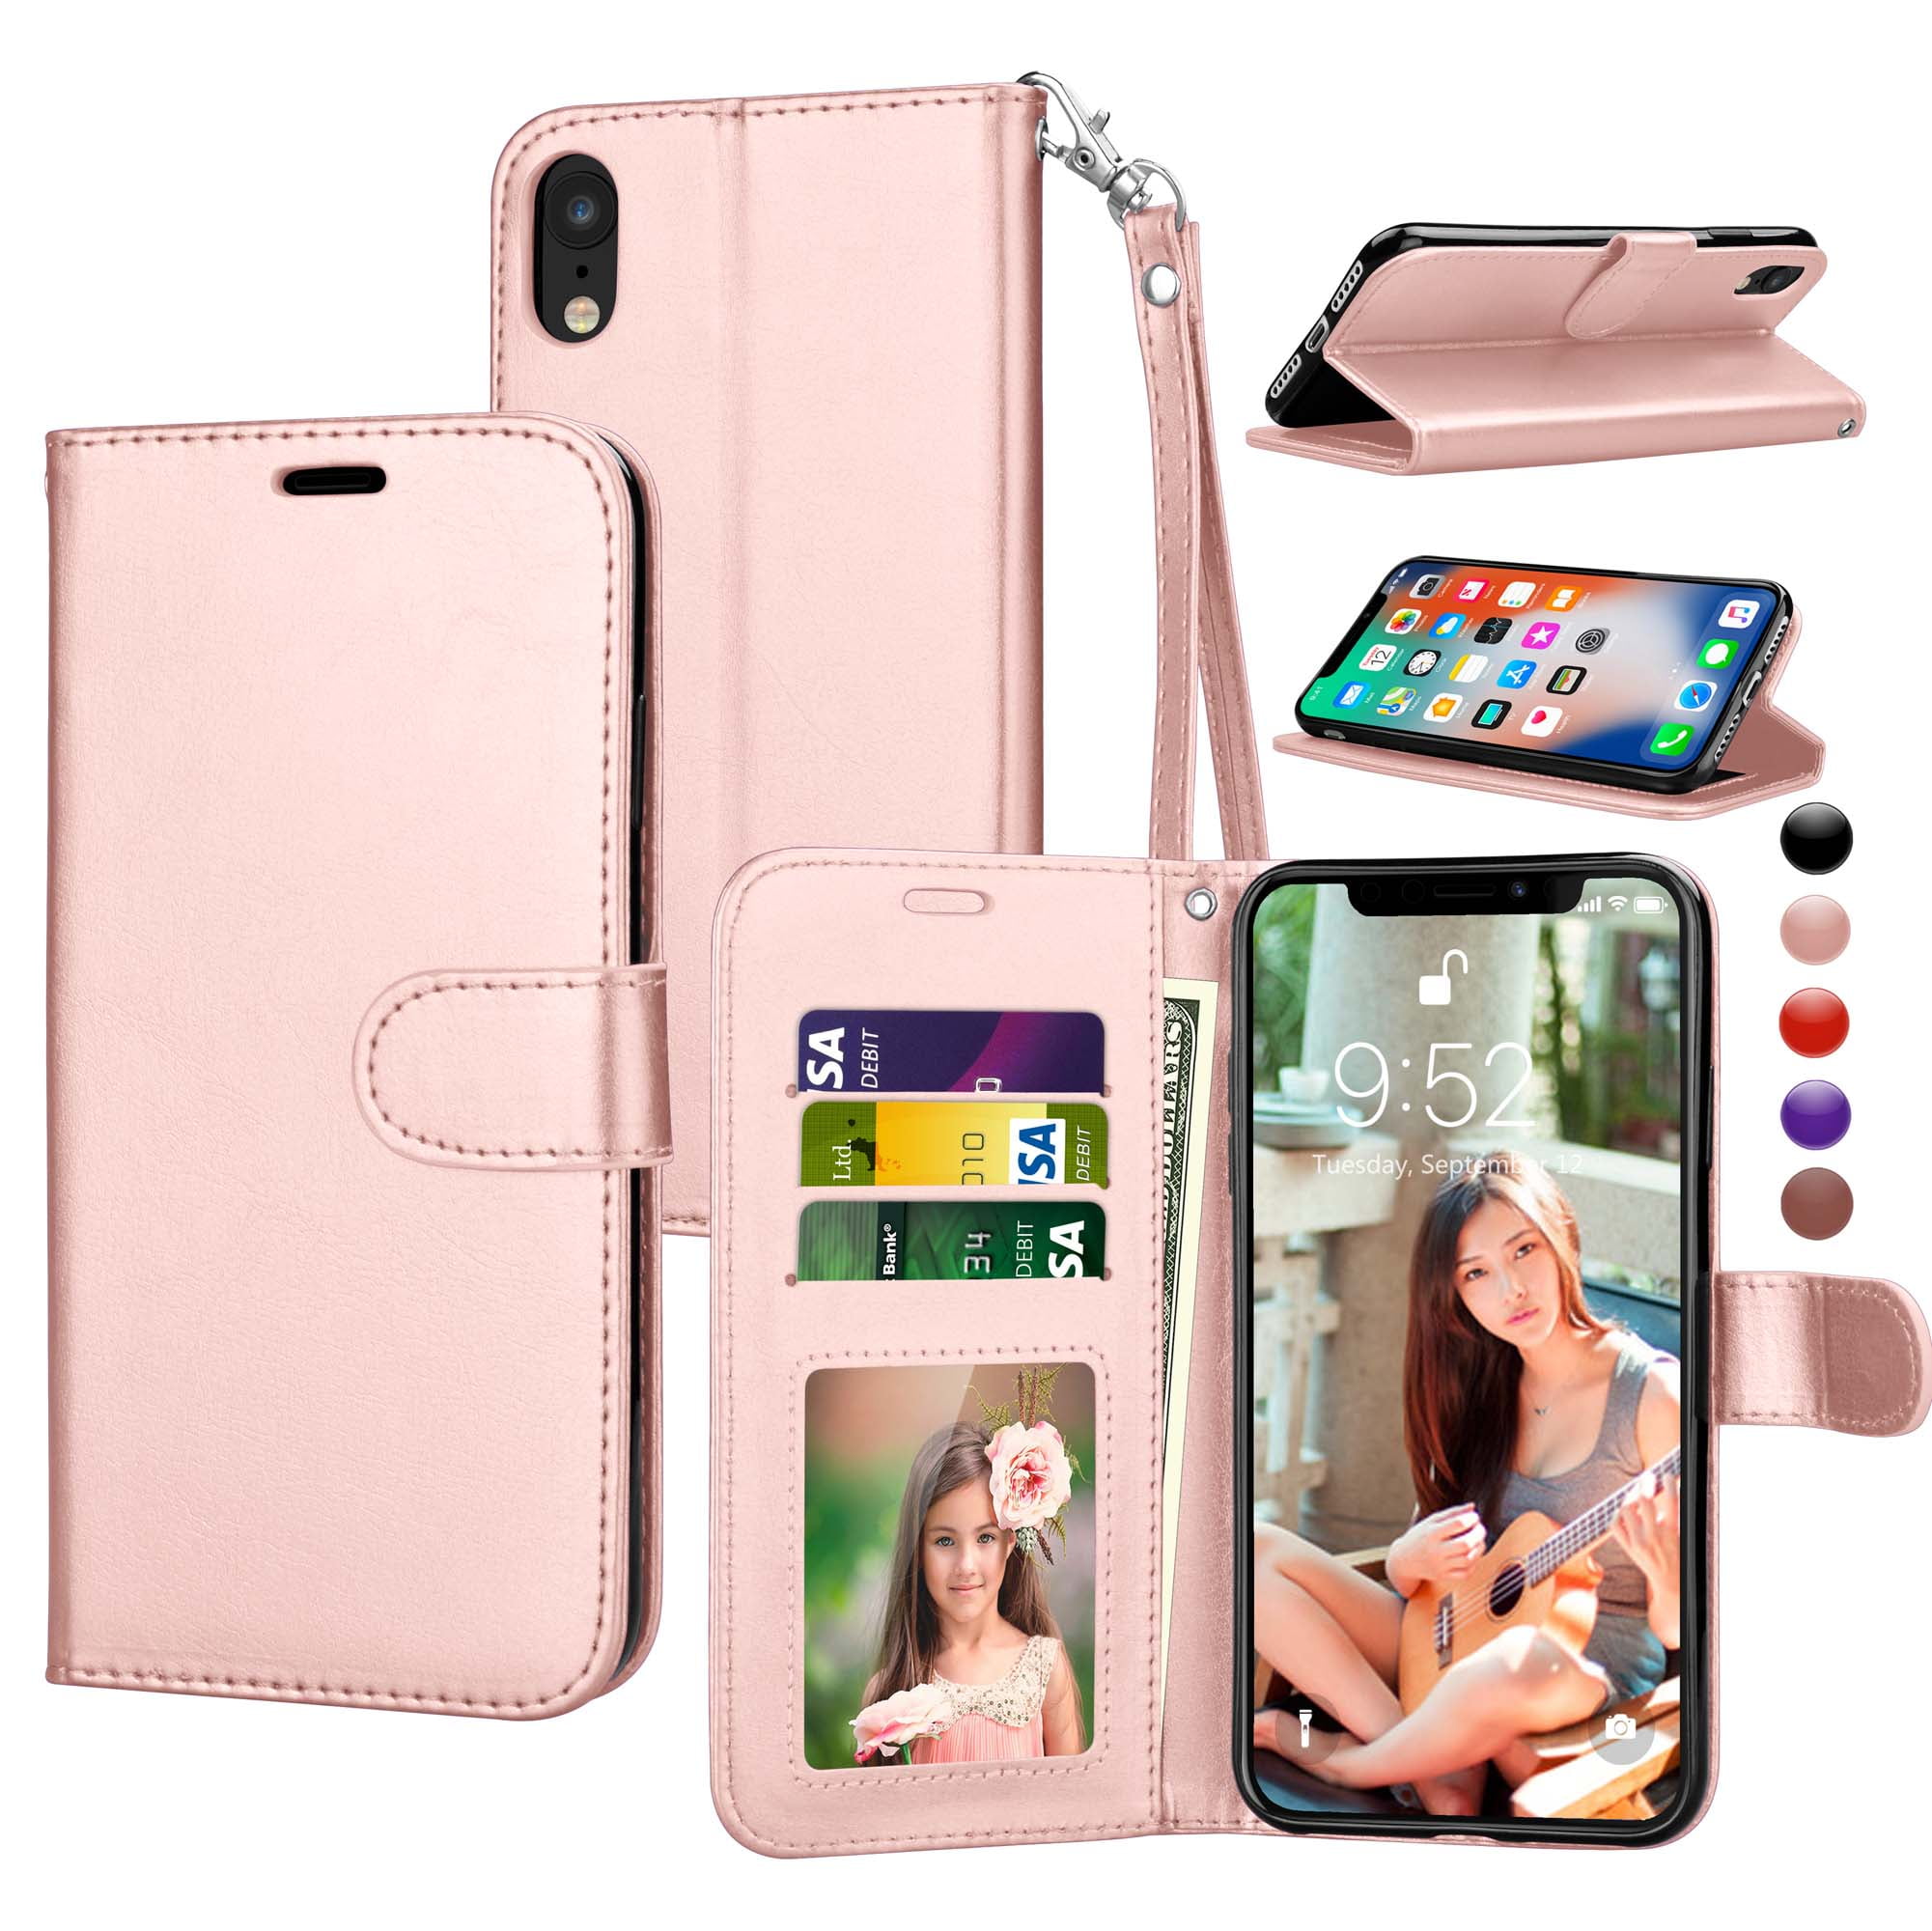 4-Slots Stand Feature ID&Credit Cards Pocket for iPhone Xr 6.1 inch with Wrist Strap and Purple Arae Wallet Case for iPhone xr 2018 PU Leather flip case Cover 